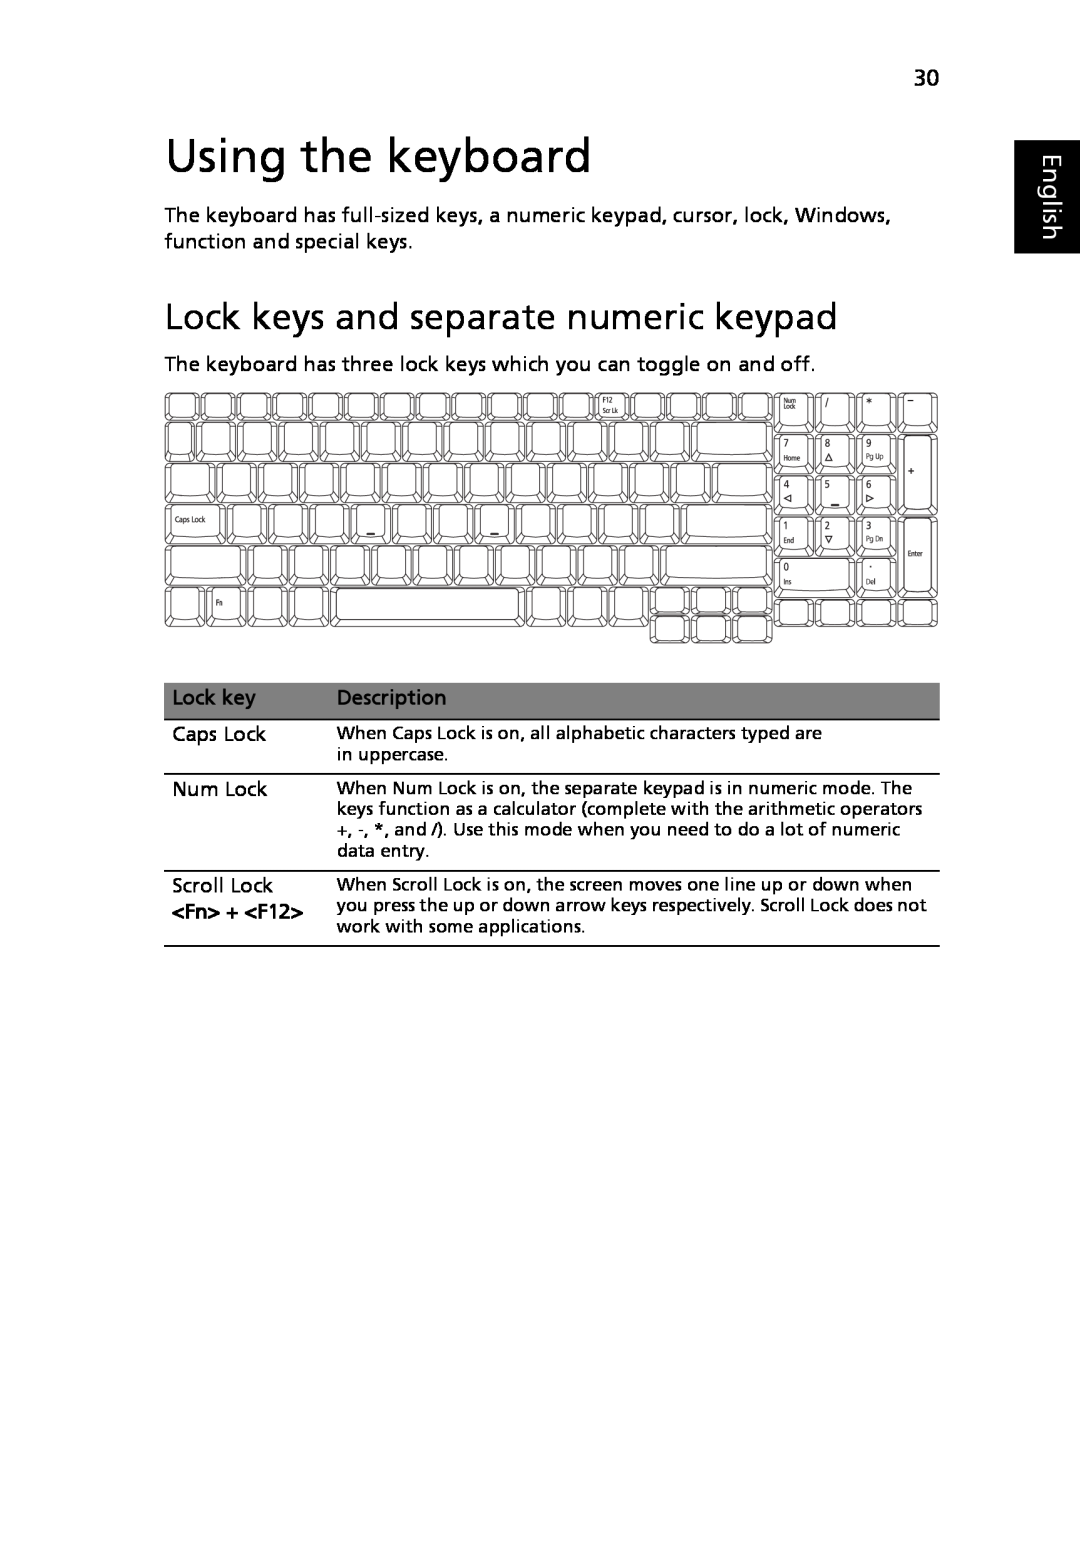 Acer LE1, 8920 Series manual Using the keyboard, Lock keys and separate numeric keypad, English, Description, Fn + F12 